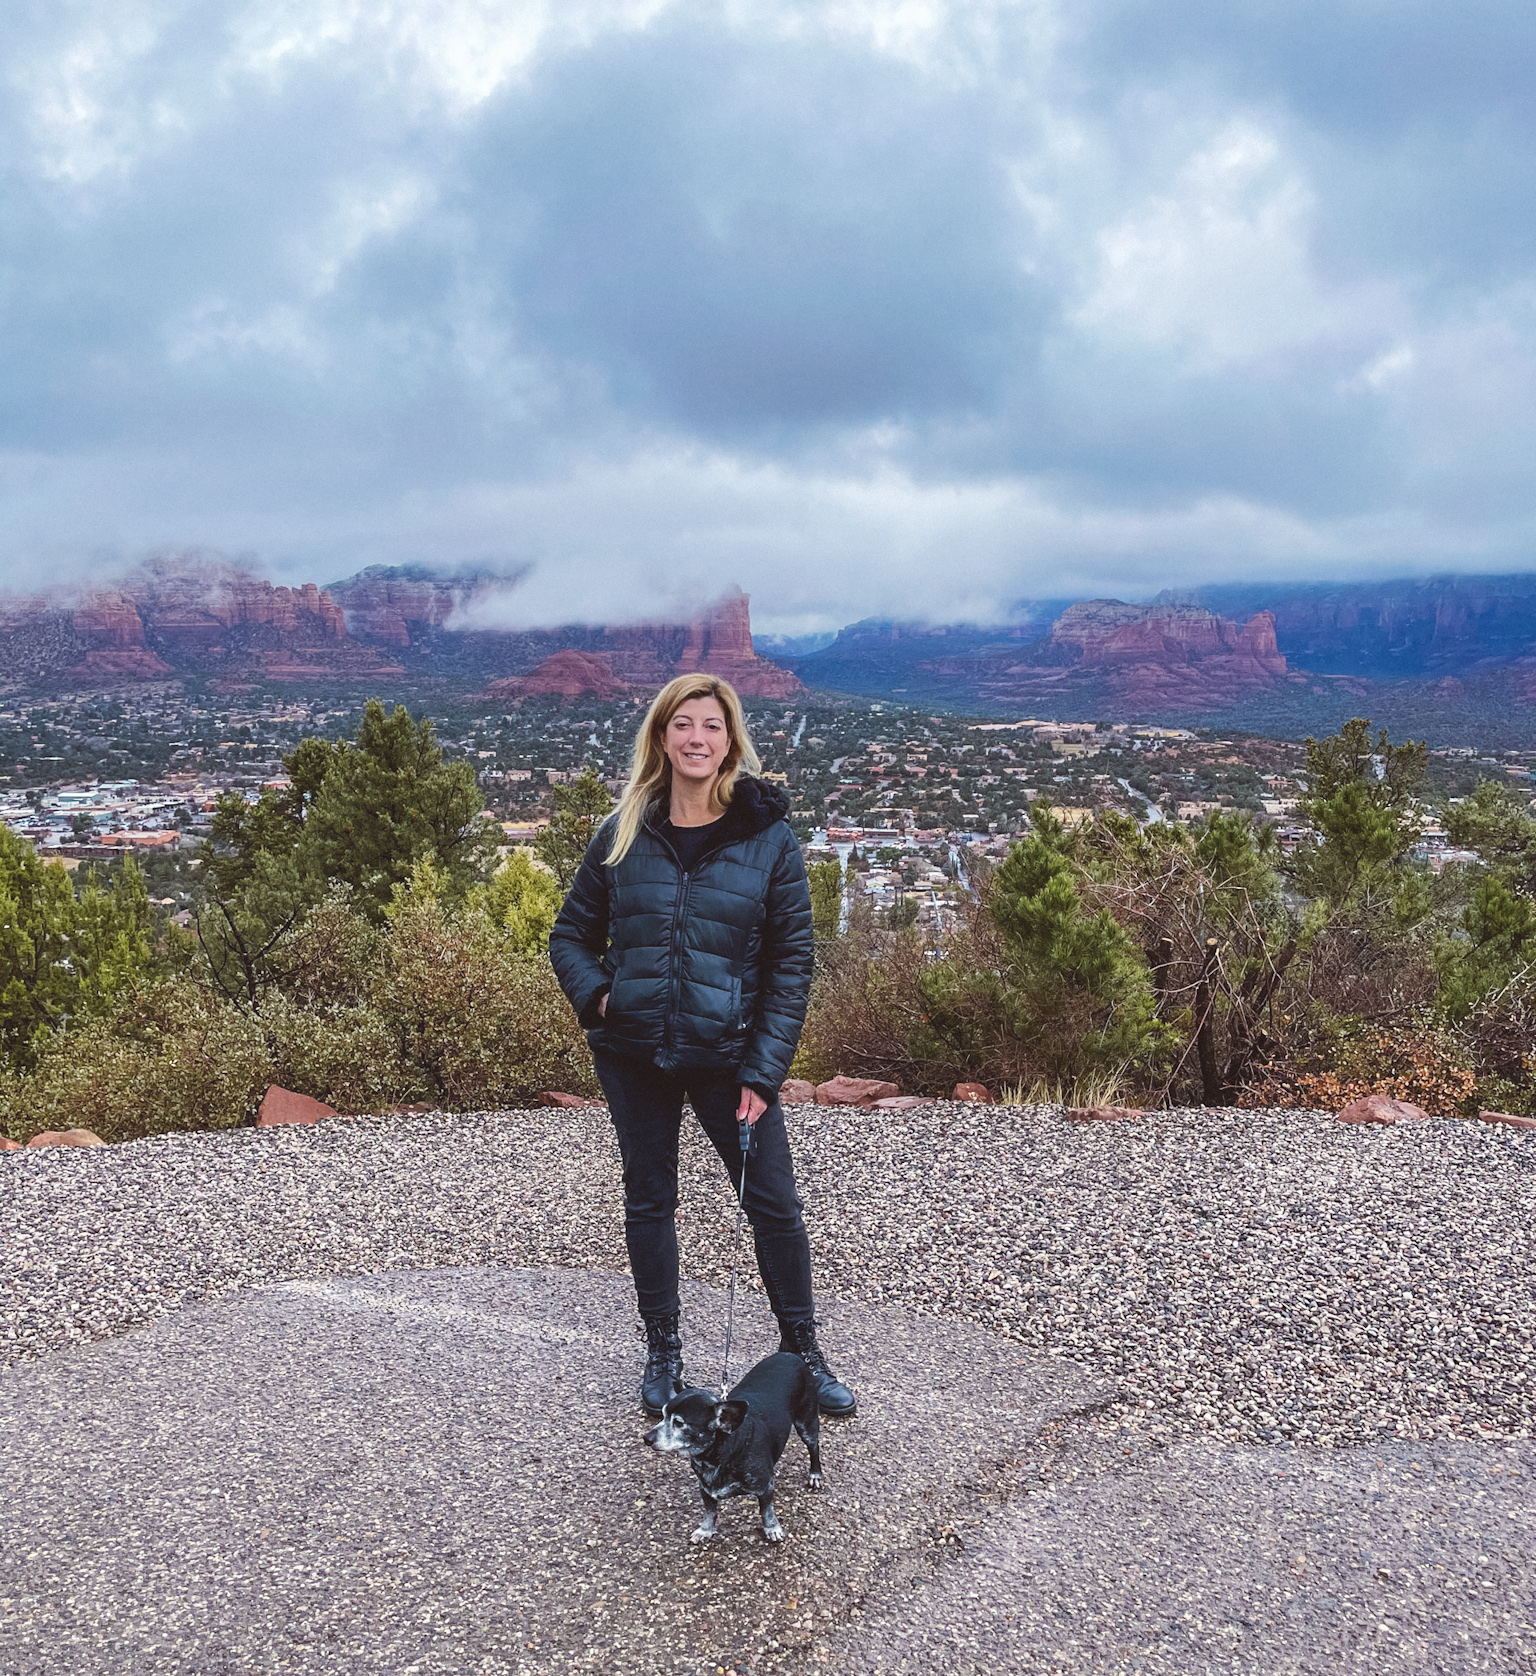 Best Time to visit Sedona